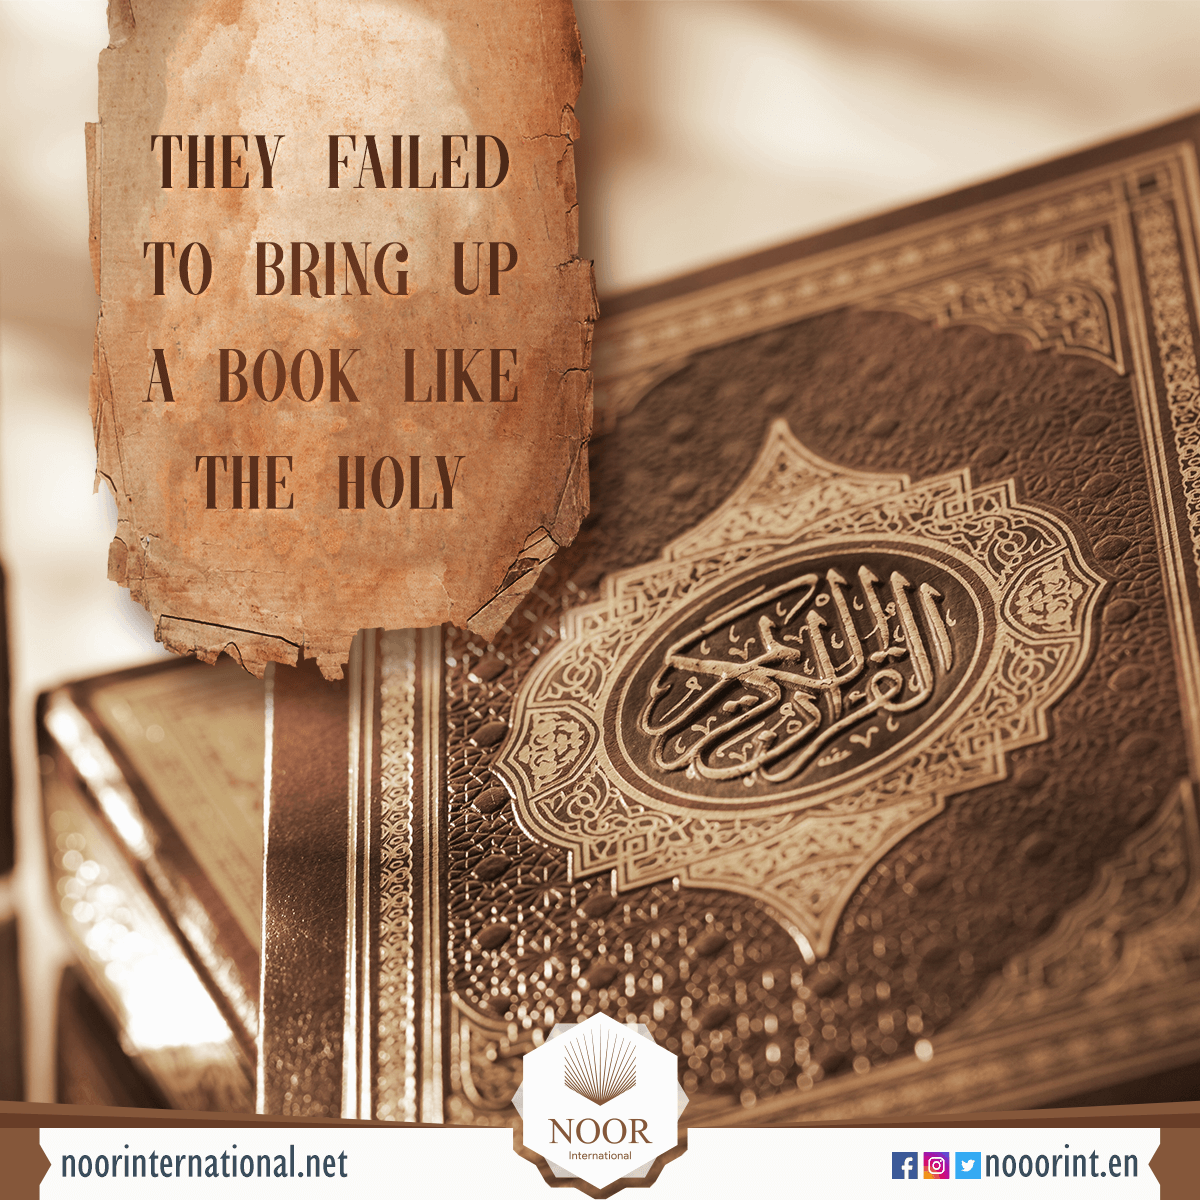 They failed to bring up a book like the Holy Quran.